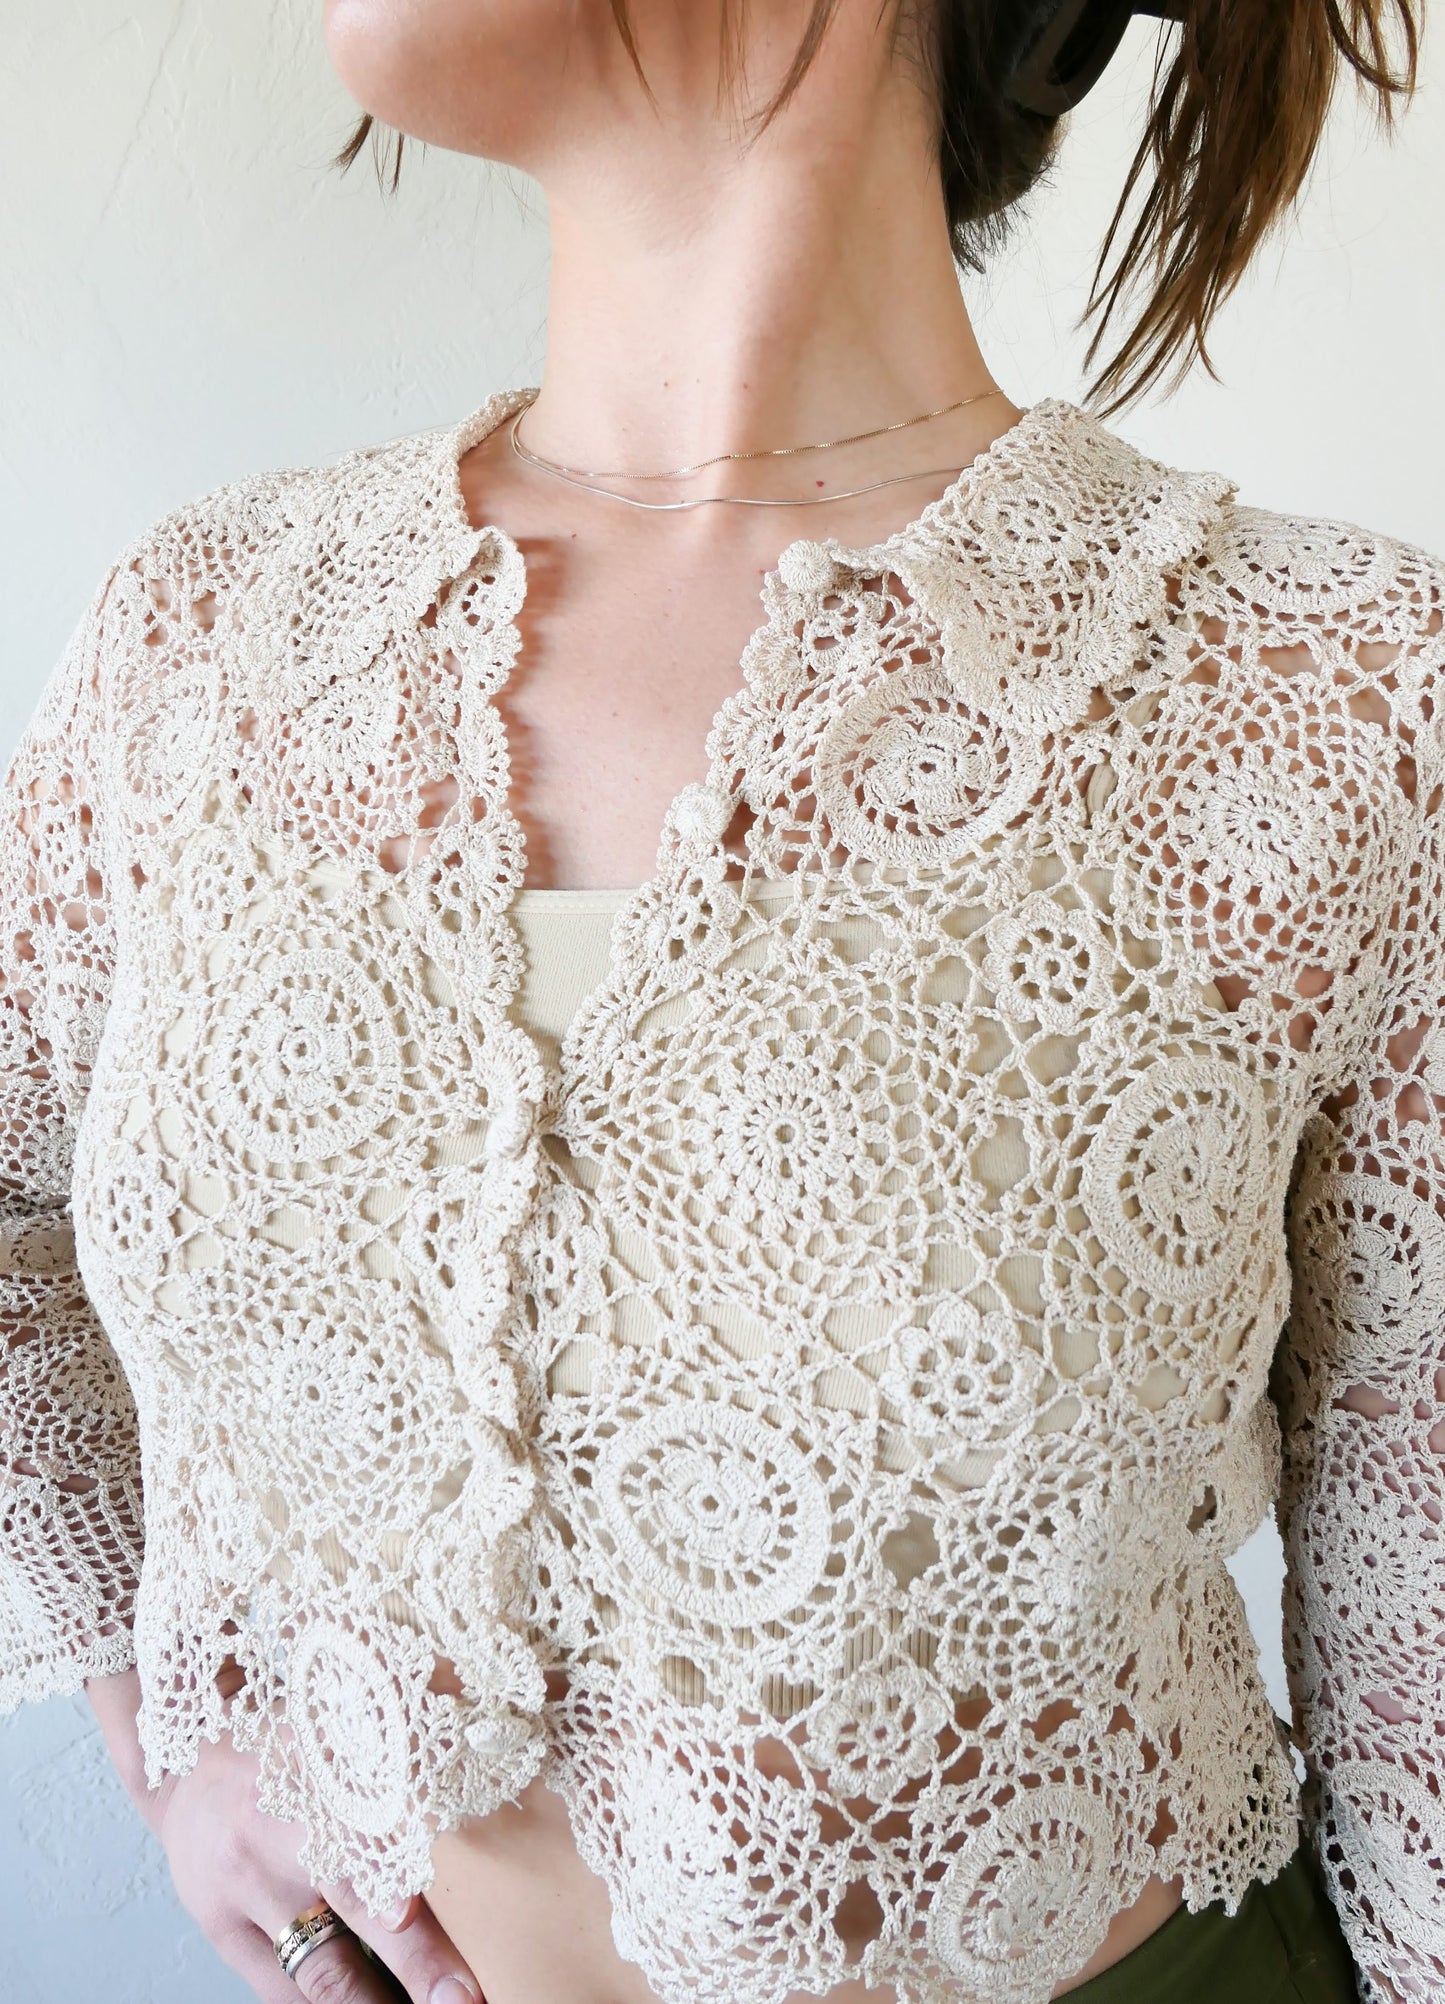 Closeup front view of natural colored crochet crop cardigan. A versatile and boho chic hand crocheted cropped cardigan sweater with a unique, repeating kaleidoscope-like floral pattern throughout. Dress it down with a pair of jeans and sandals, or dress it up with neutral colored wide leg pants, heels, and a pair of vintage dangly earrings.